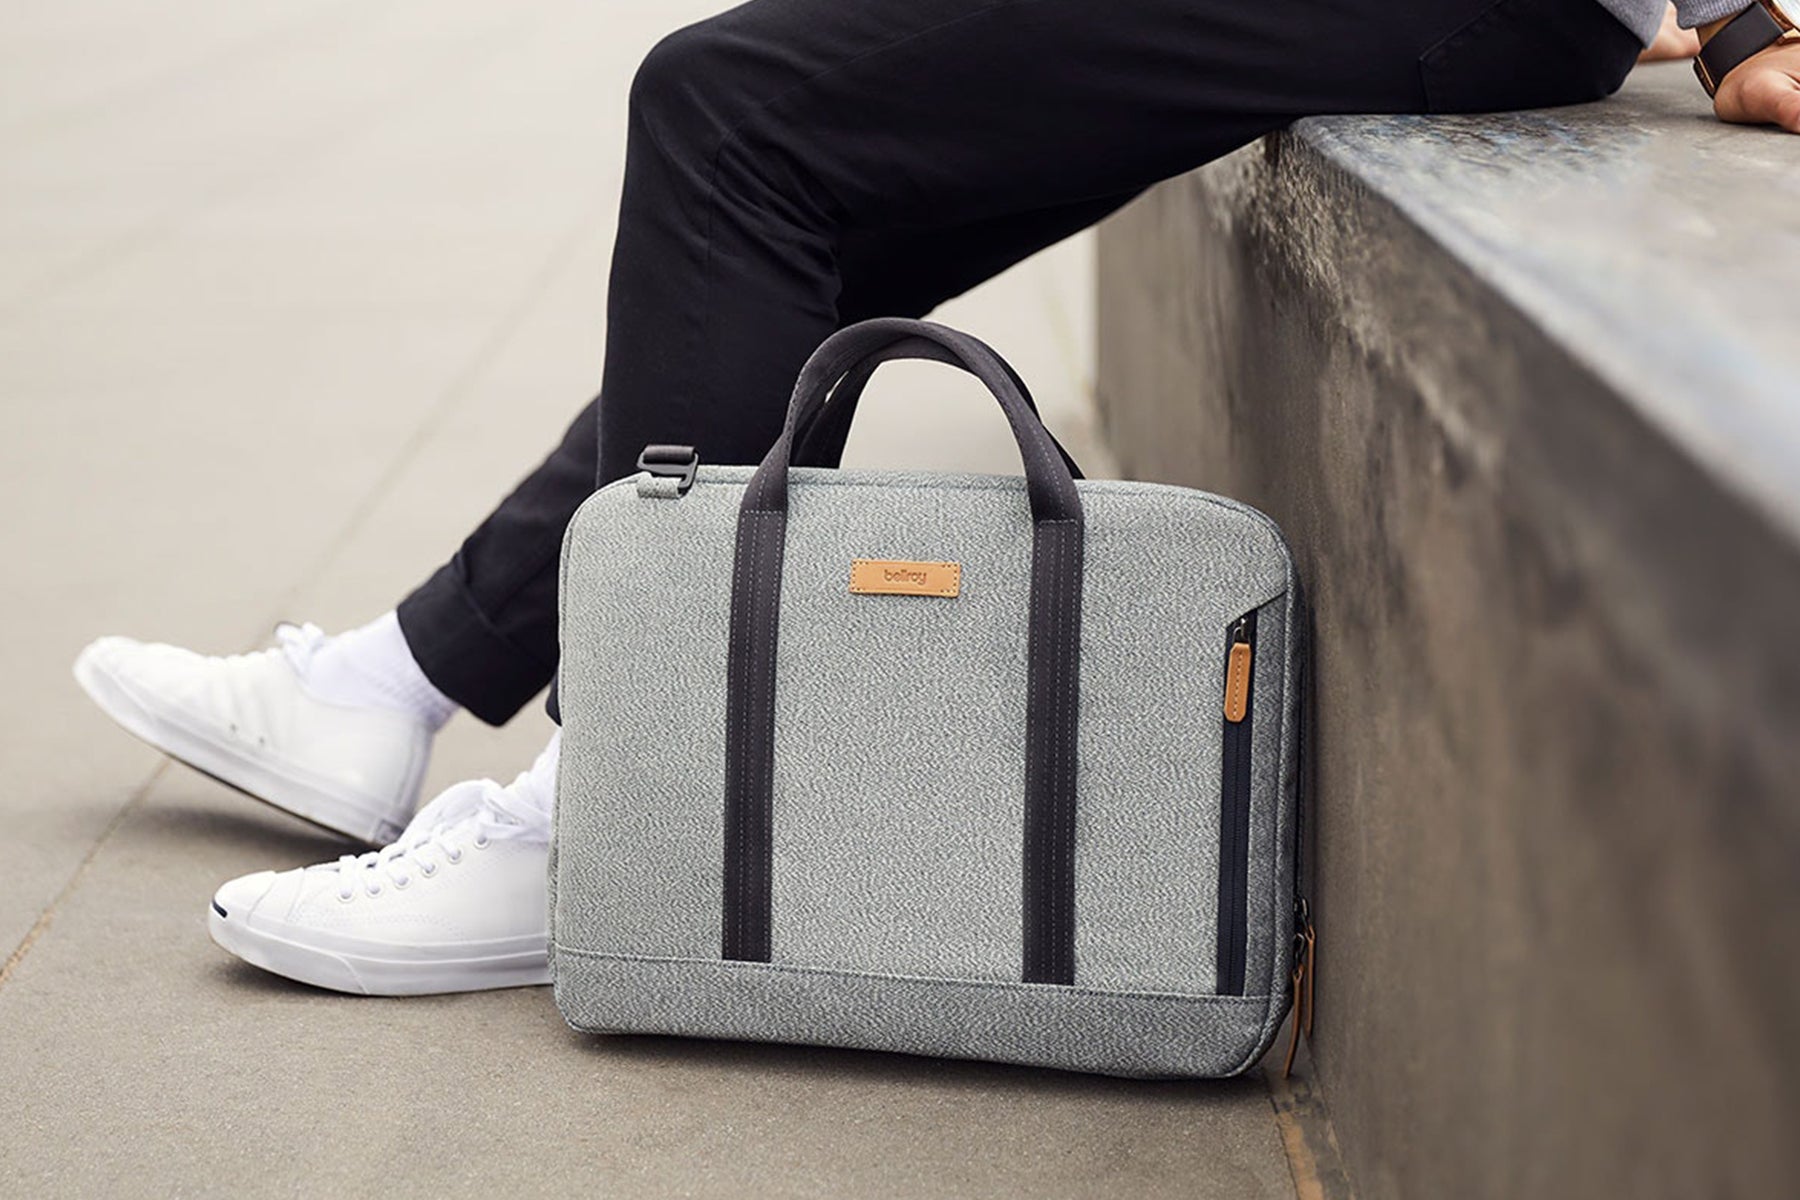 The Bellroy Classic Brief, Designed For The Modern Professional